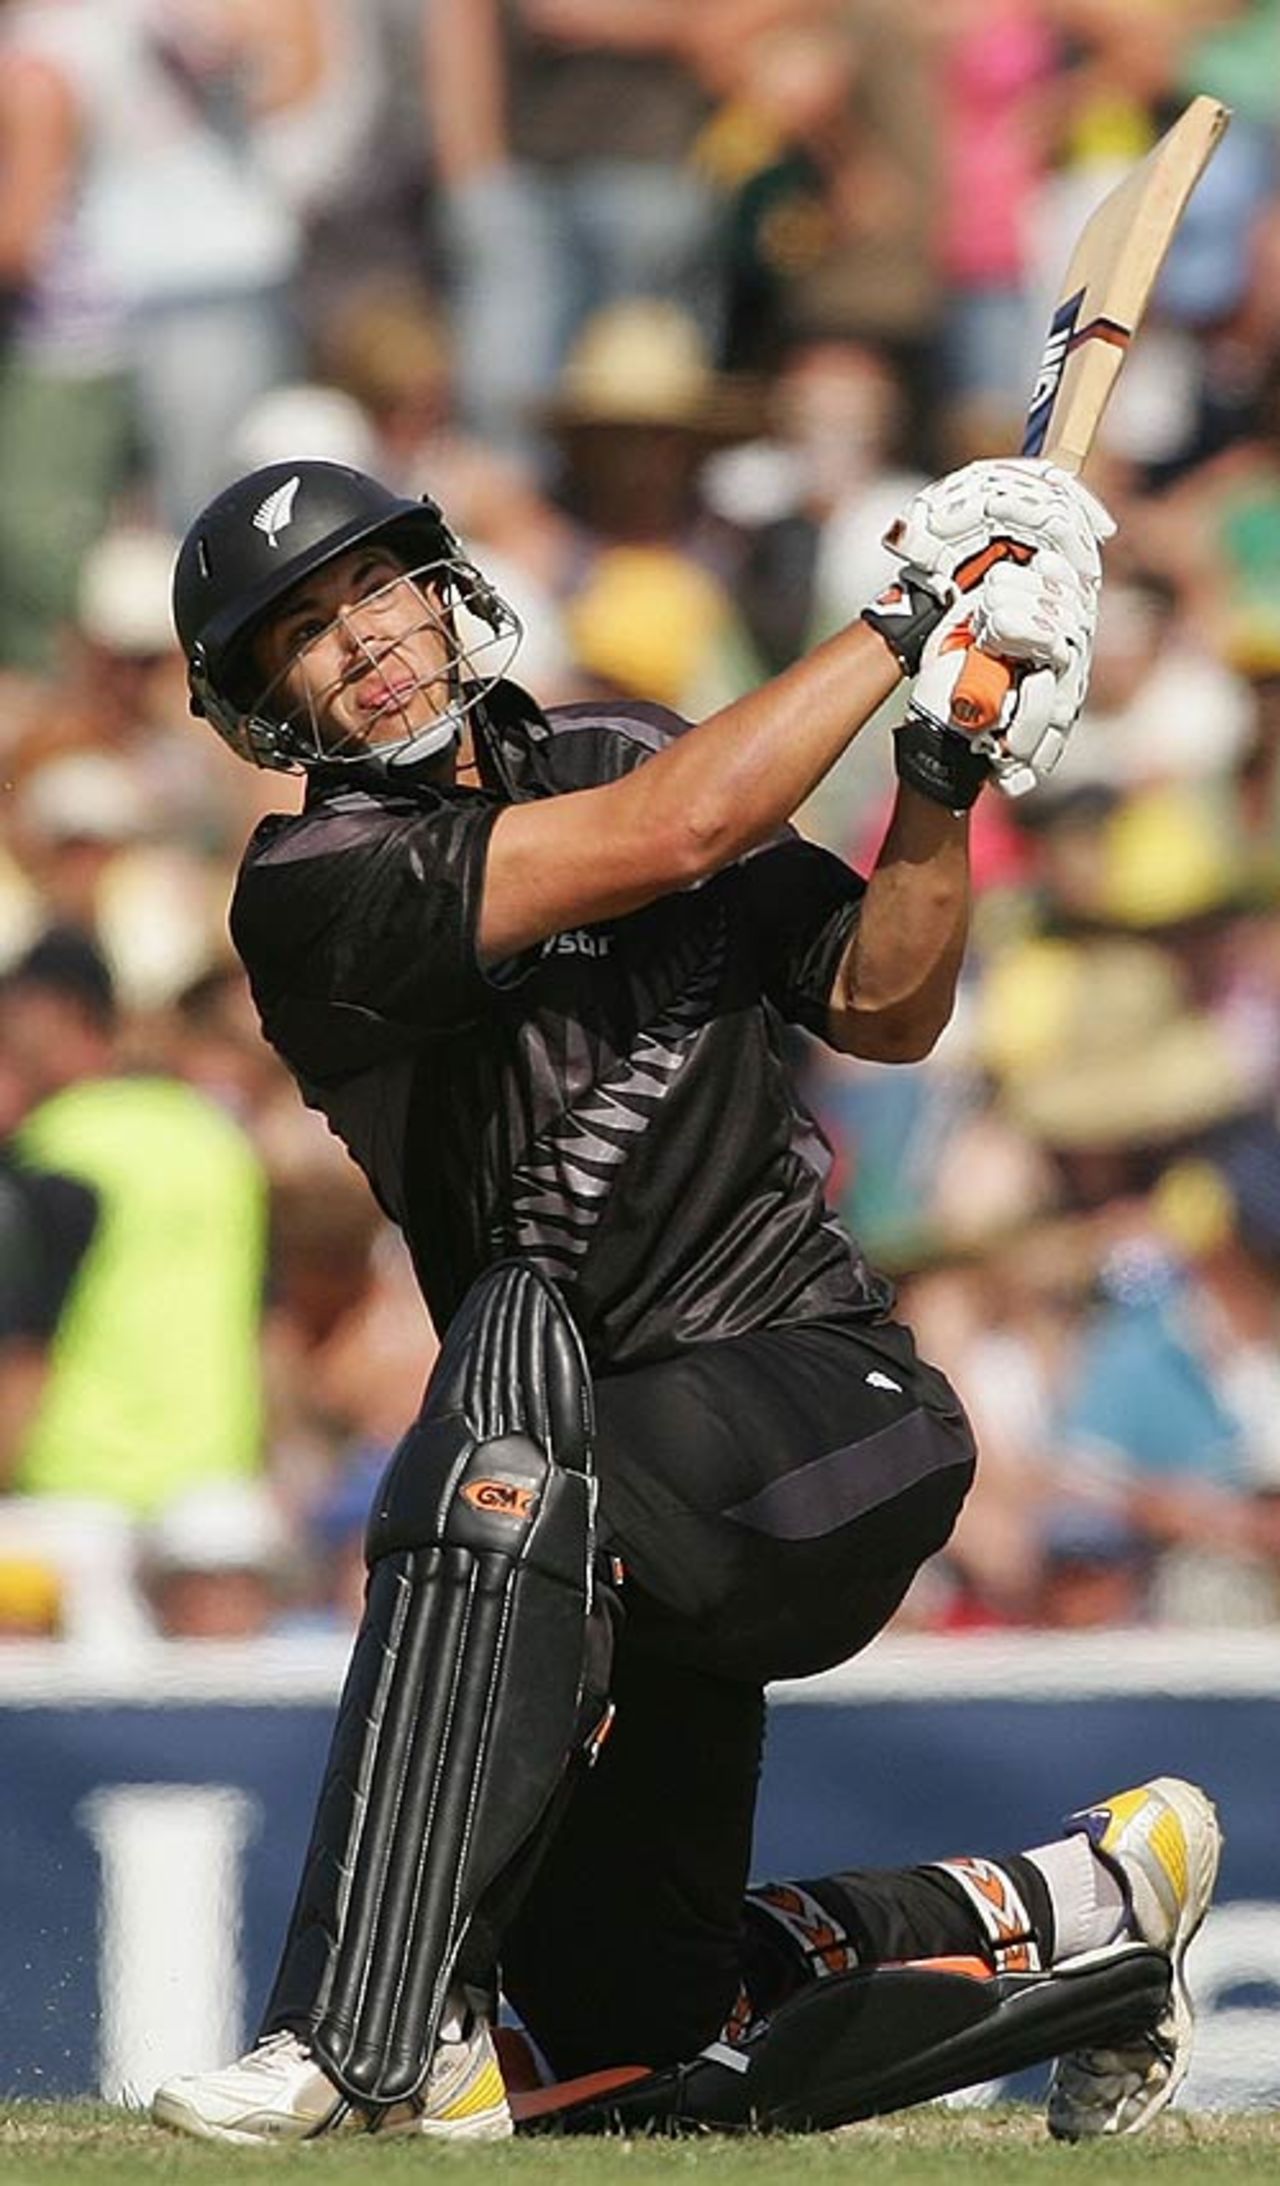 Ross Taylor launches one of three sixes on his way to 84, Australia v New Zealand, CB Series, 2nd match, Hobart, January 14, 2007